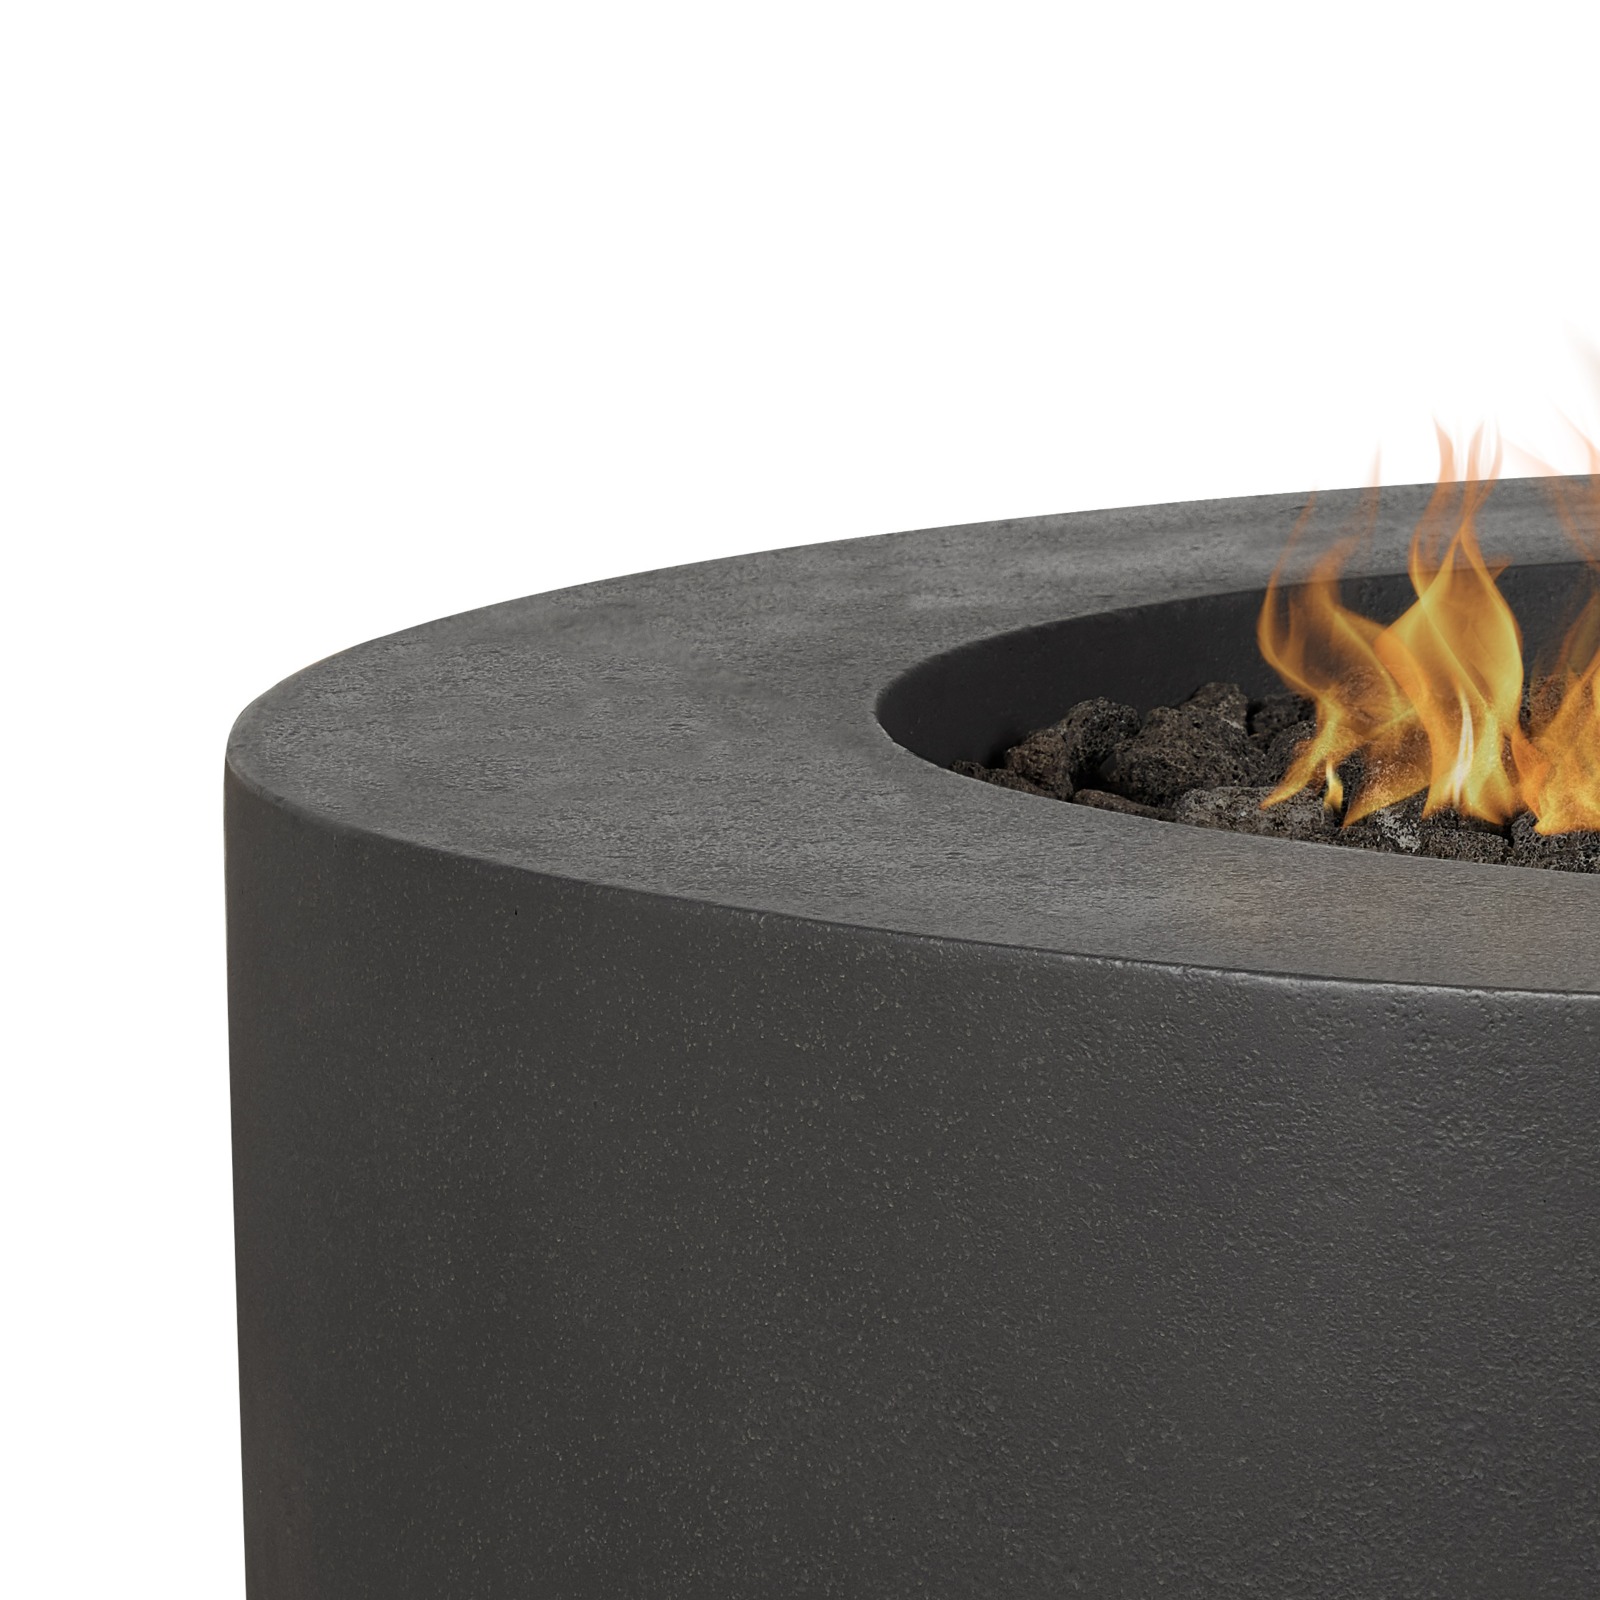 43" La Valle Round Propane Fire Table in Carbon detail shot